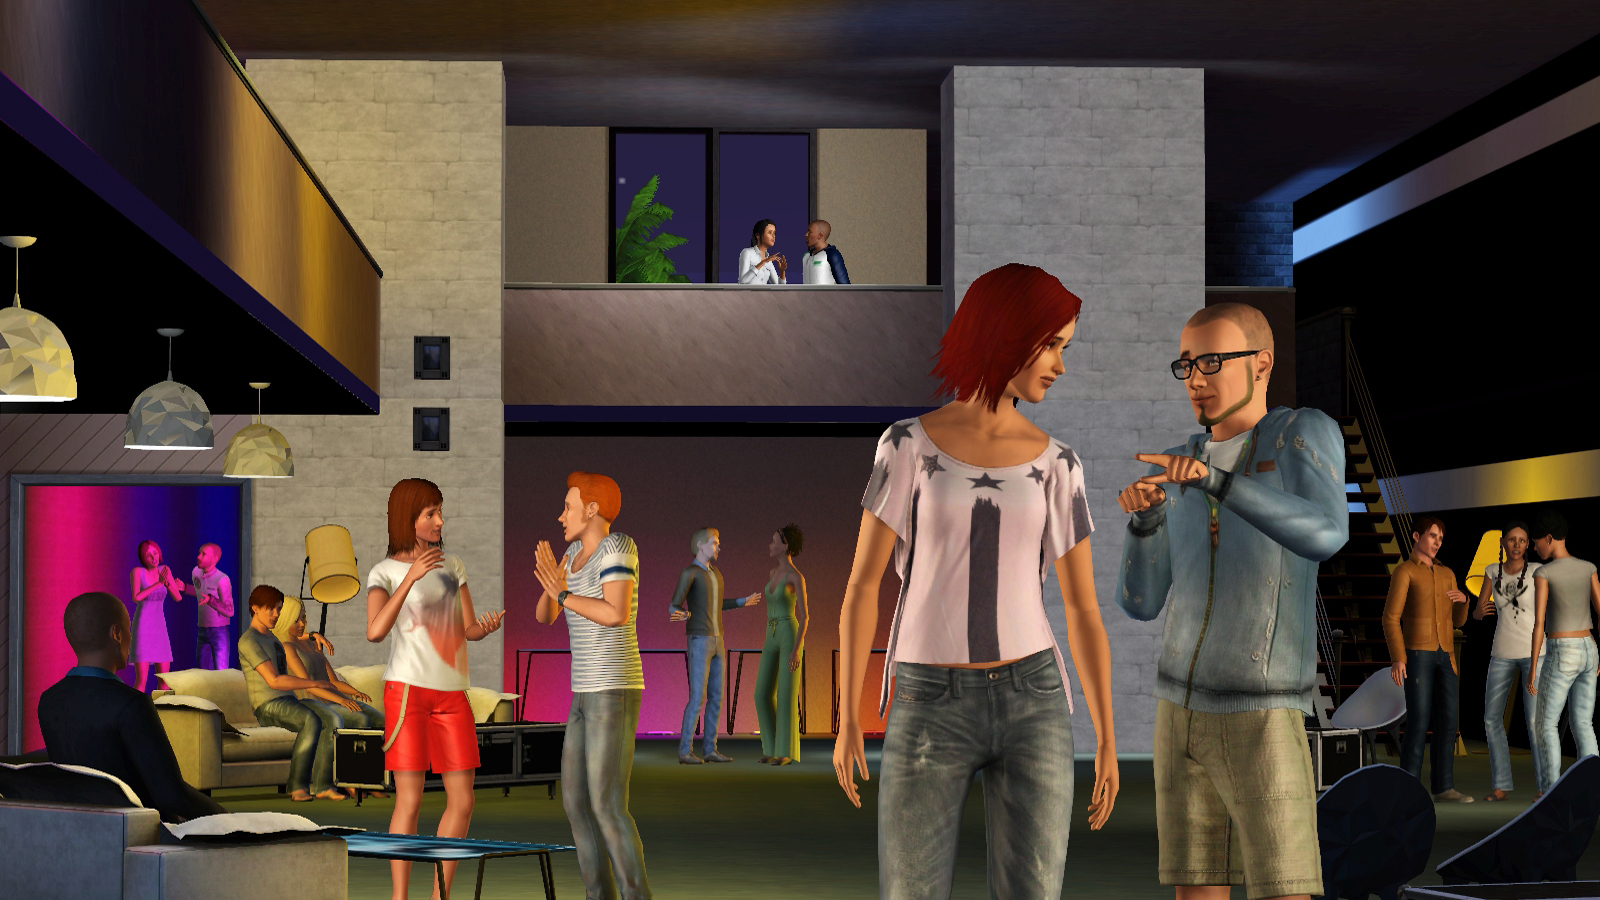 The Sims 3 University Life Expansion Pack (PC DVD) - image 4 of 5